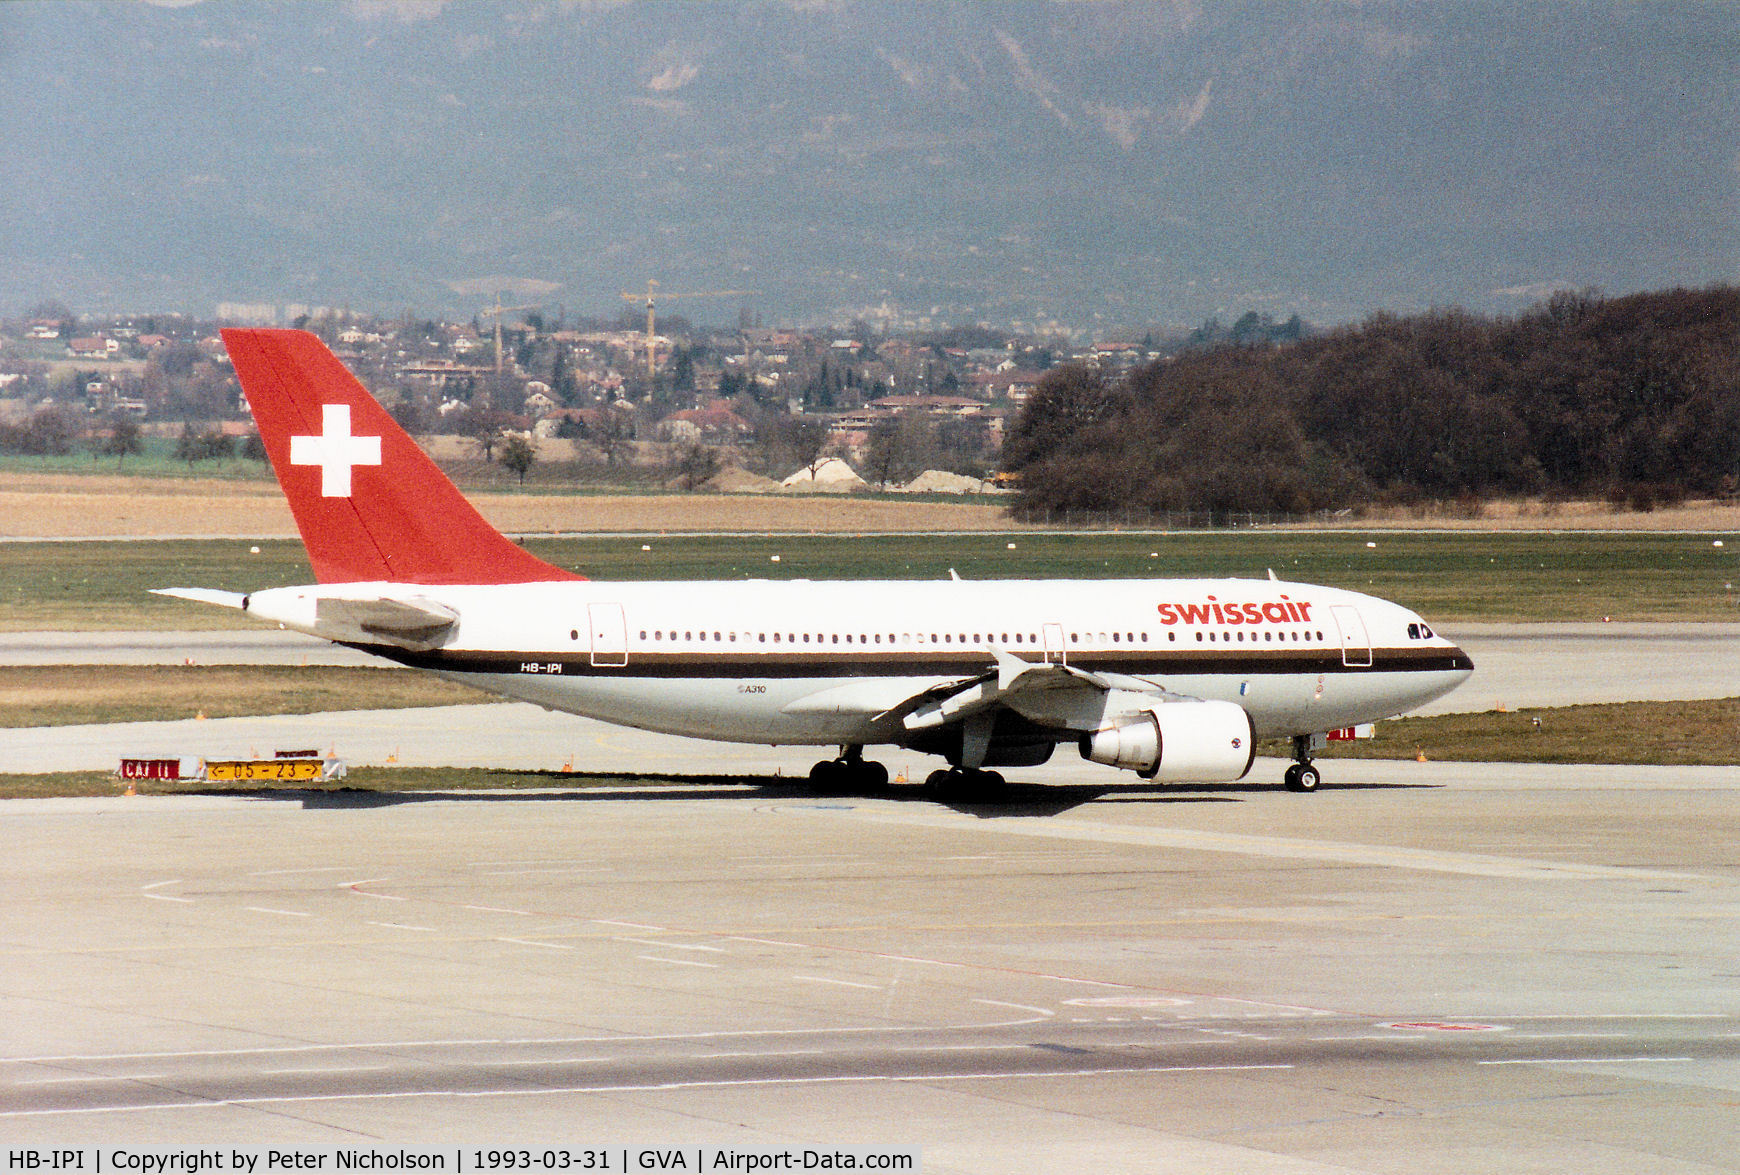 HB-IPI, 1985 Airbus A310-322 C/N 410, Airbus A310-322 of Swissair taxying to the active runwayat Geneva in March 1993.